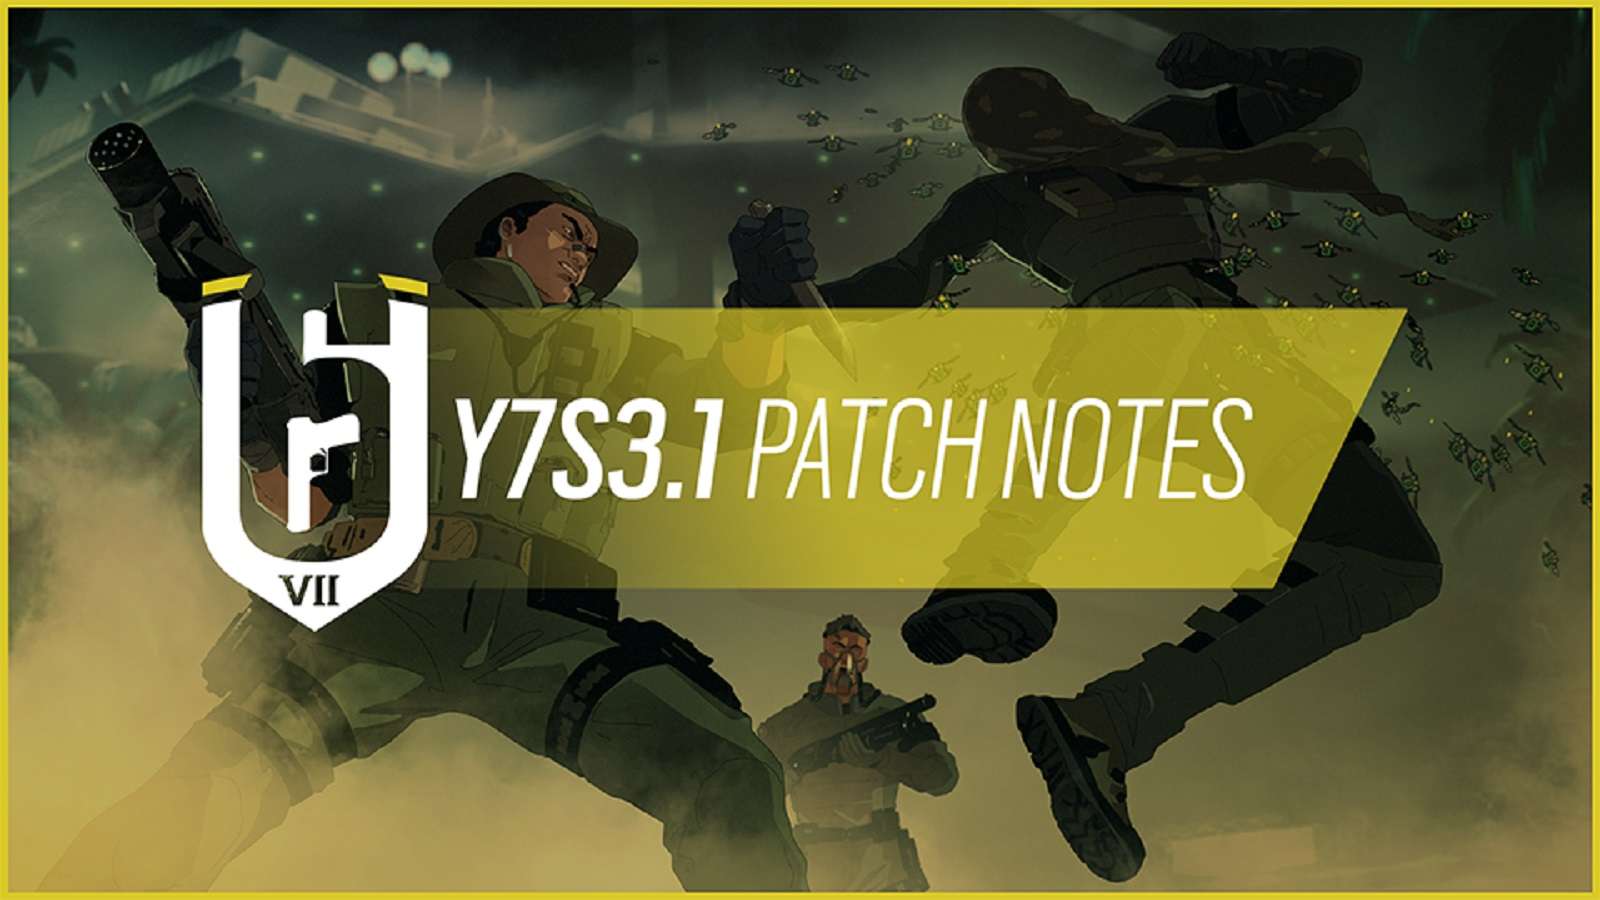 Rainbow Six Y7S3.1 patch notes image